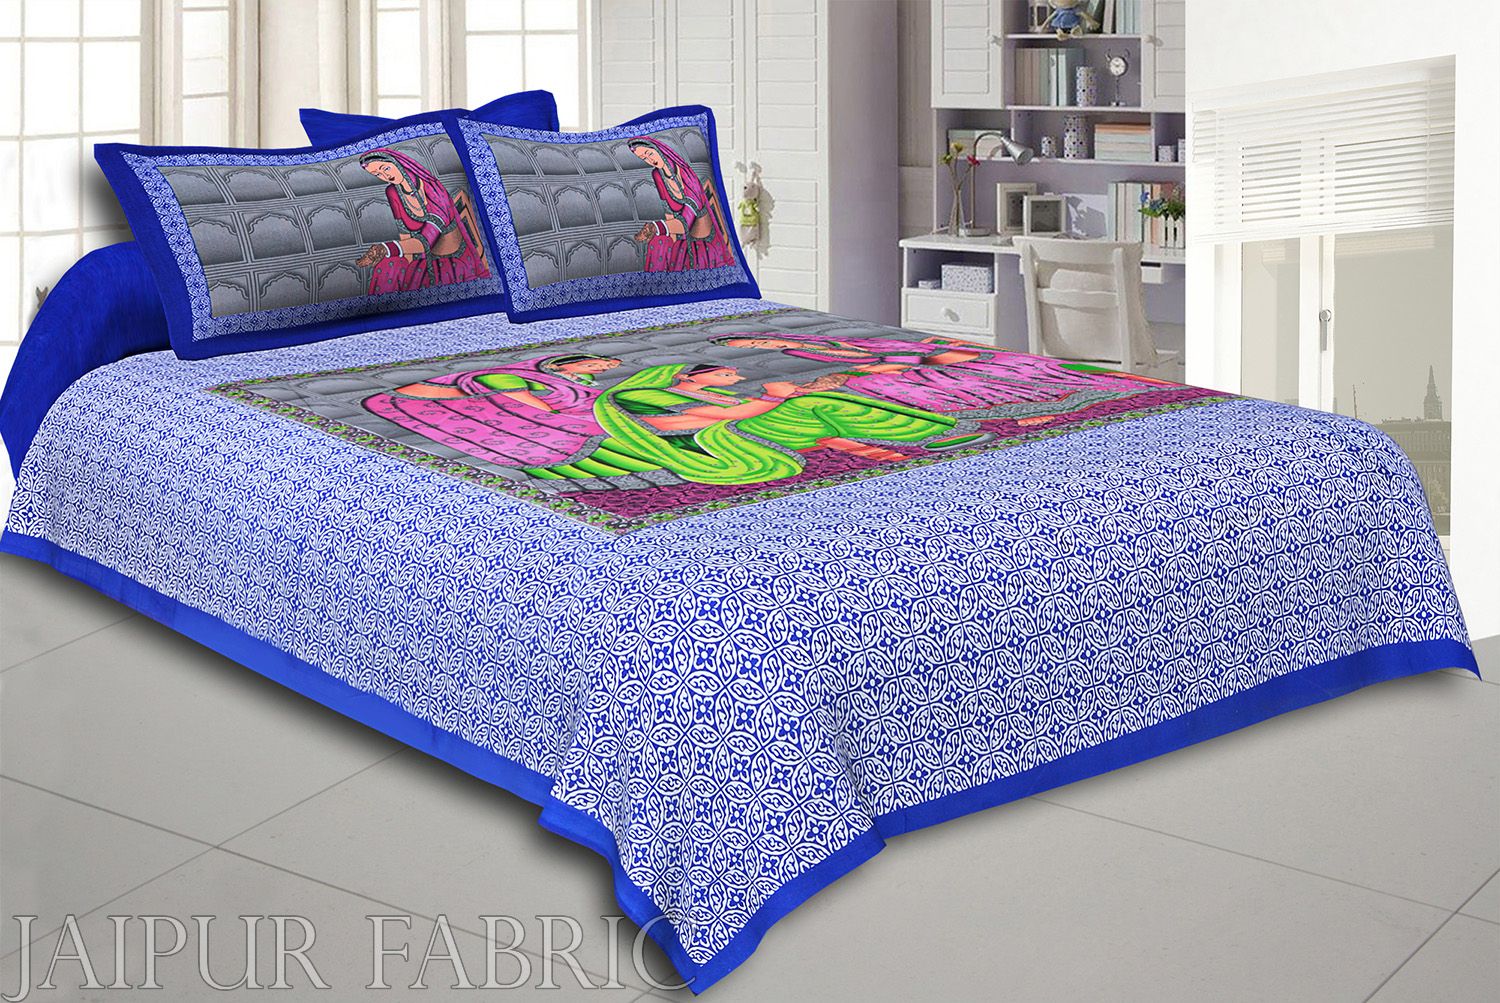 Blue Border With Blue Base '' Lady With Mehandi Creation '' Cotton Double BedSheet With 2 Cover